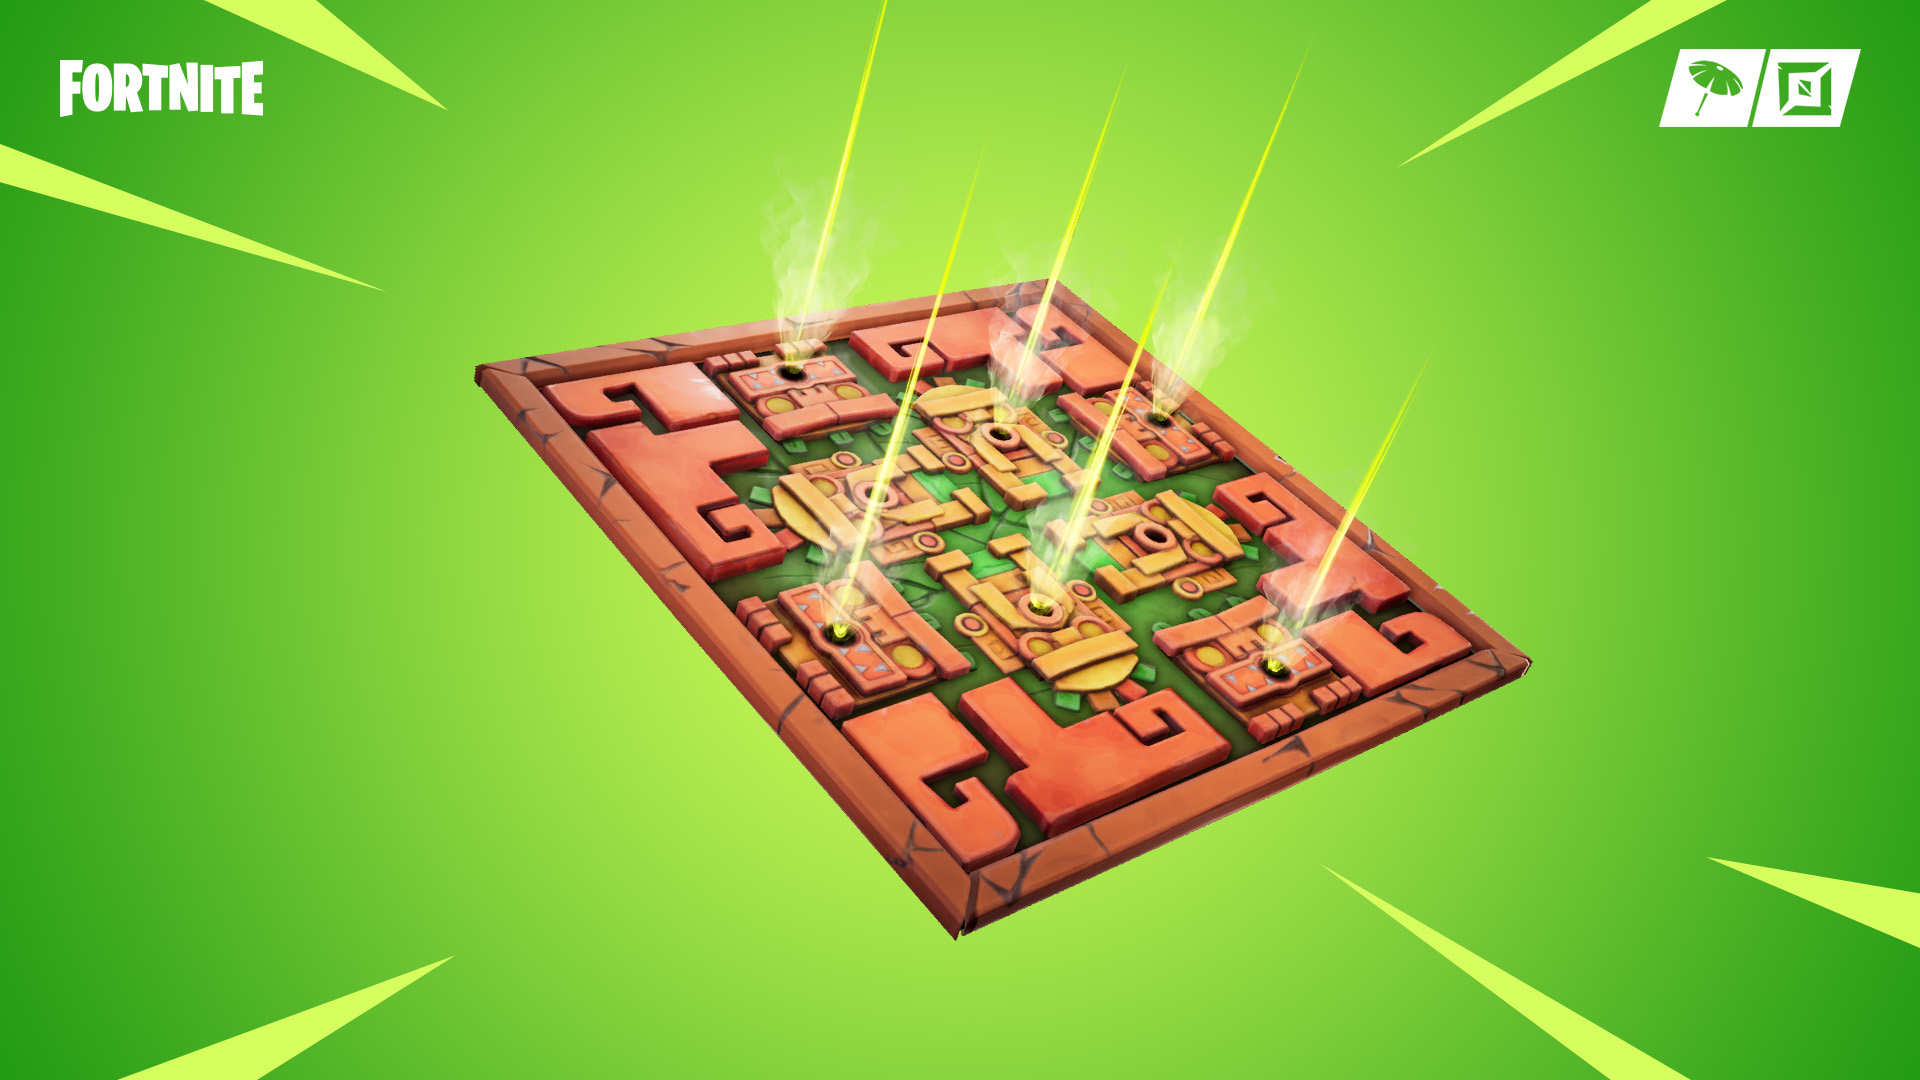 today patch 8 20 arrives across all platforms adding the floor is lava ltm the poison dart trap and new foraged items in addition to mobile fixes - fortnite voice chat mobile not working